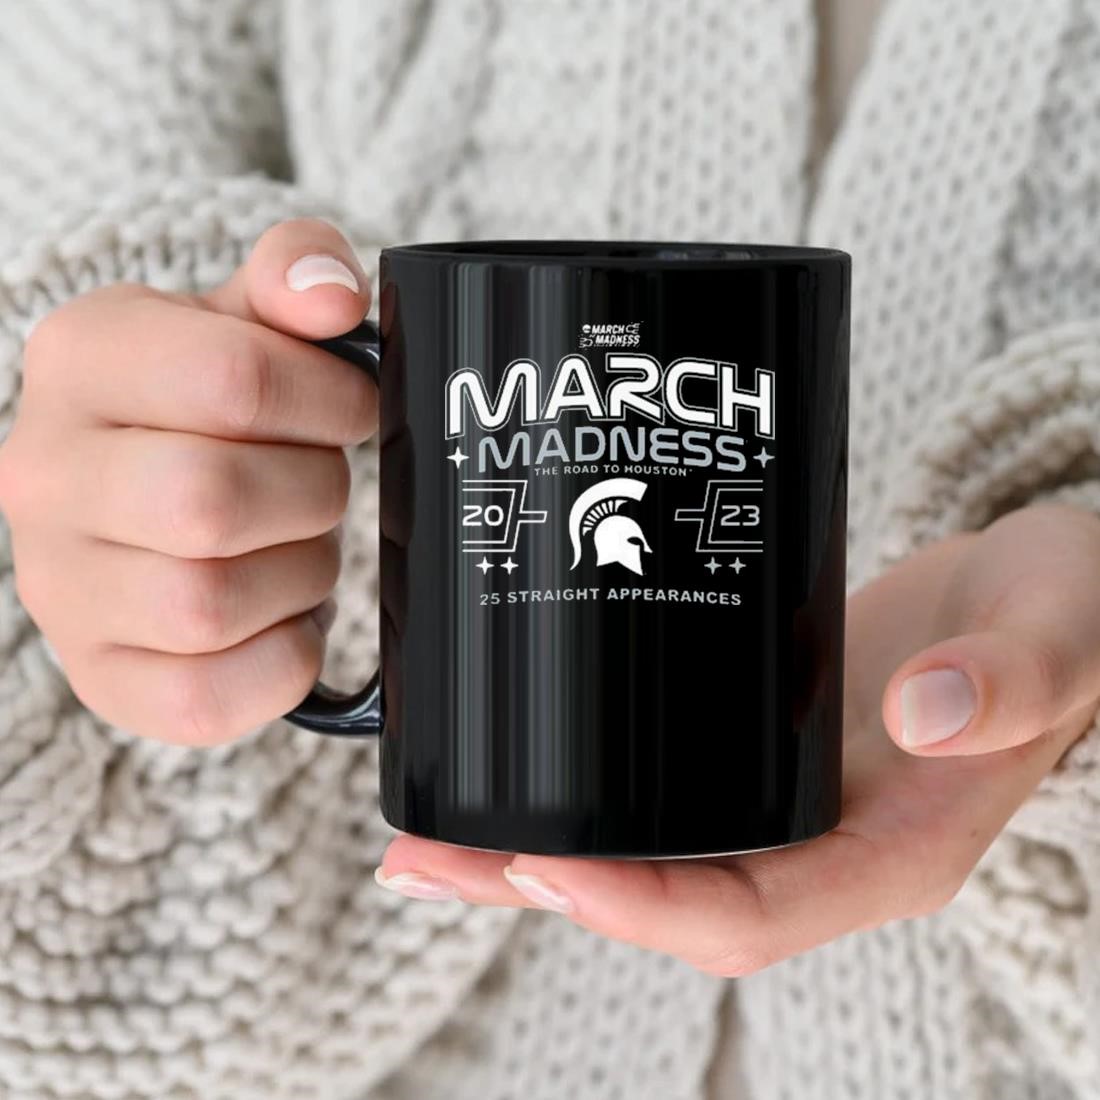 Michigan State Spartans 2023 March Madness The Road To Houston Mug nhu.jpg